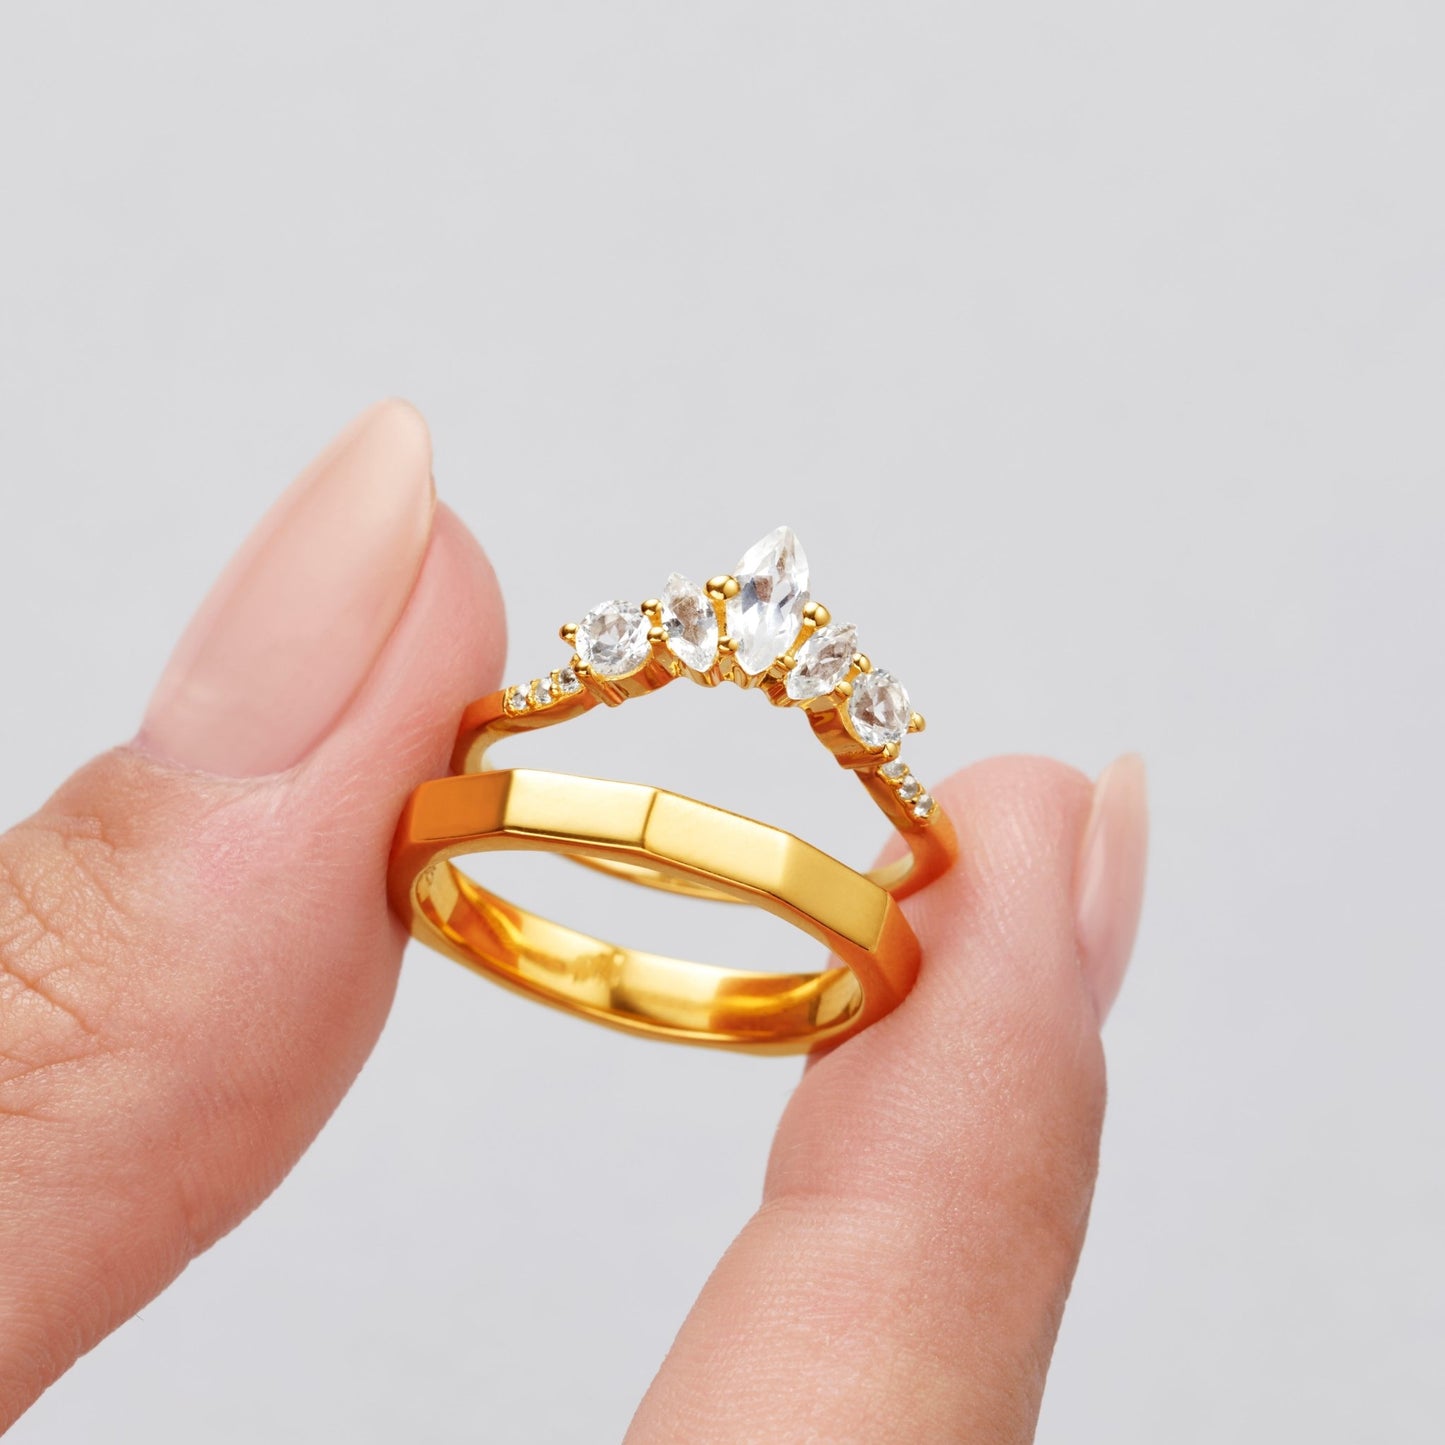 WHITE TOPAZ CROWN HUGGING RING - Fool's Gold Jewellery